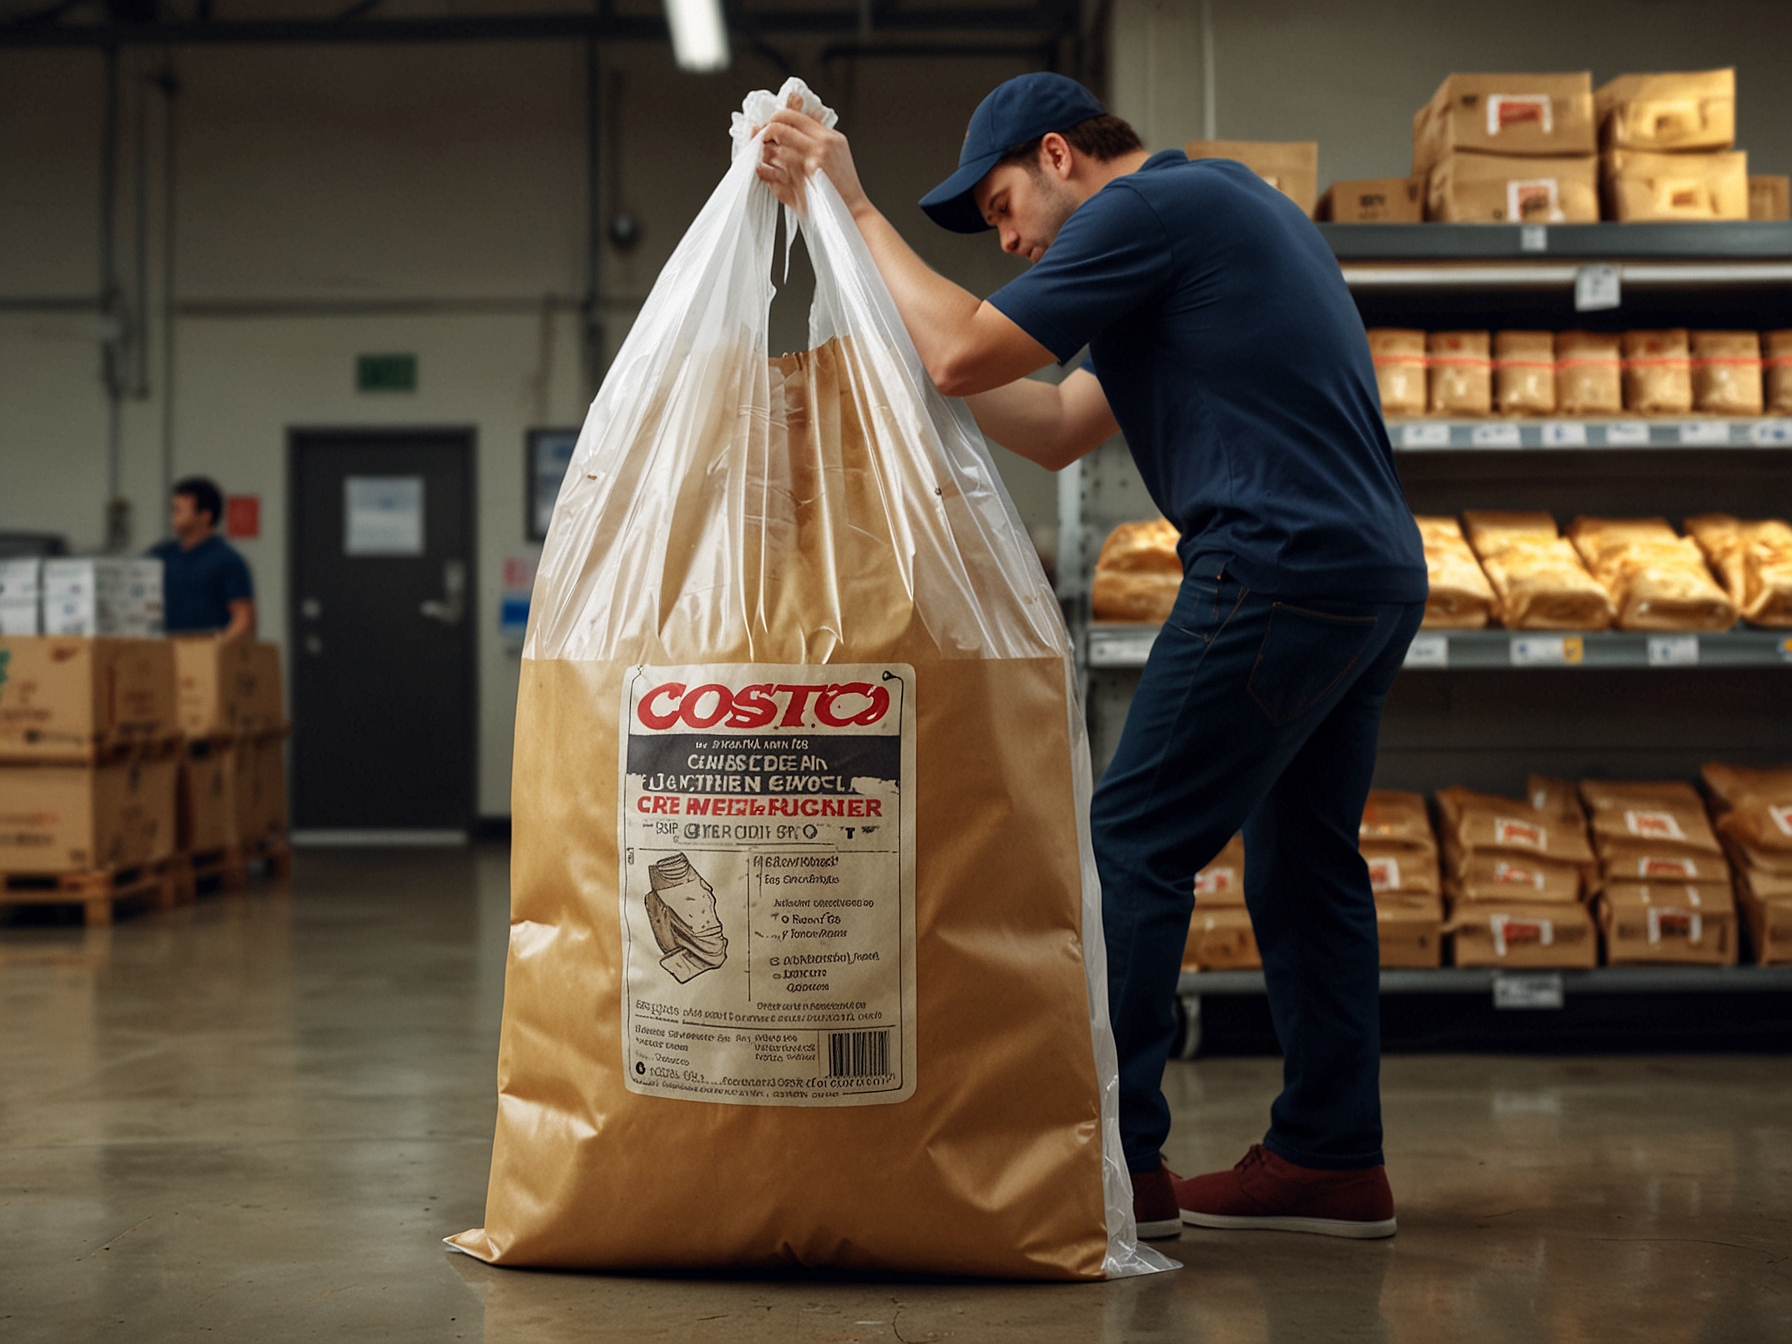 A customer struggling to open Costco's new rotisserie chicken bag without causing spills, showing the practical challenges that have led to widespread dissatisfaction.